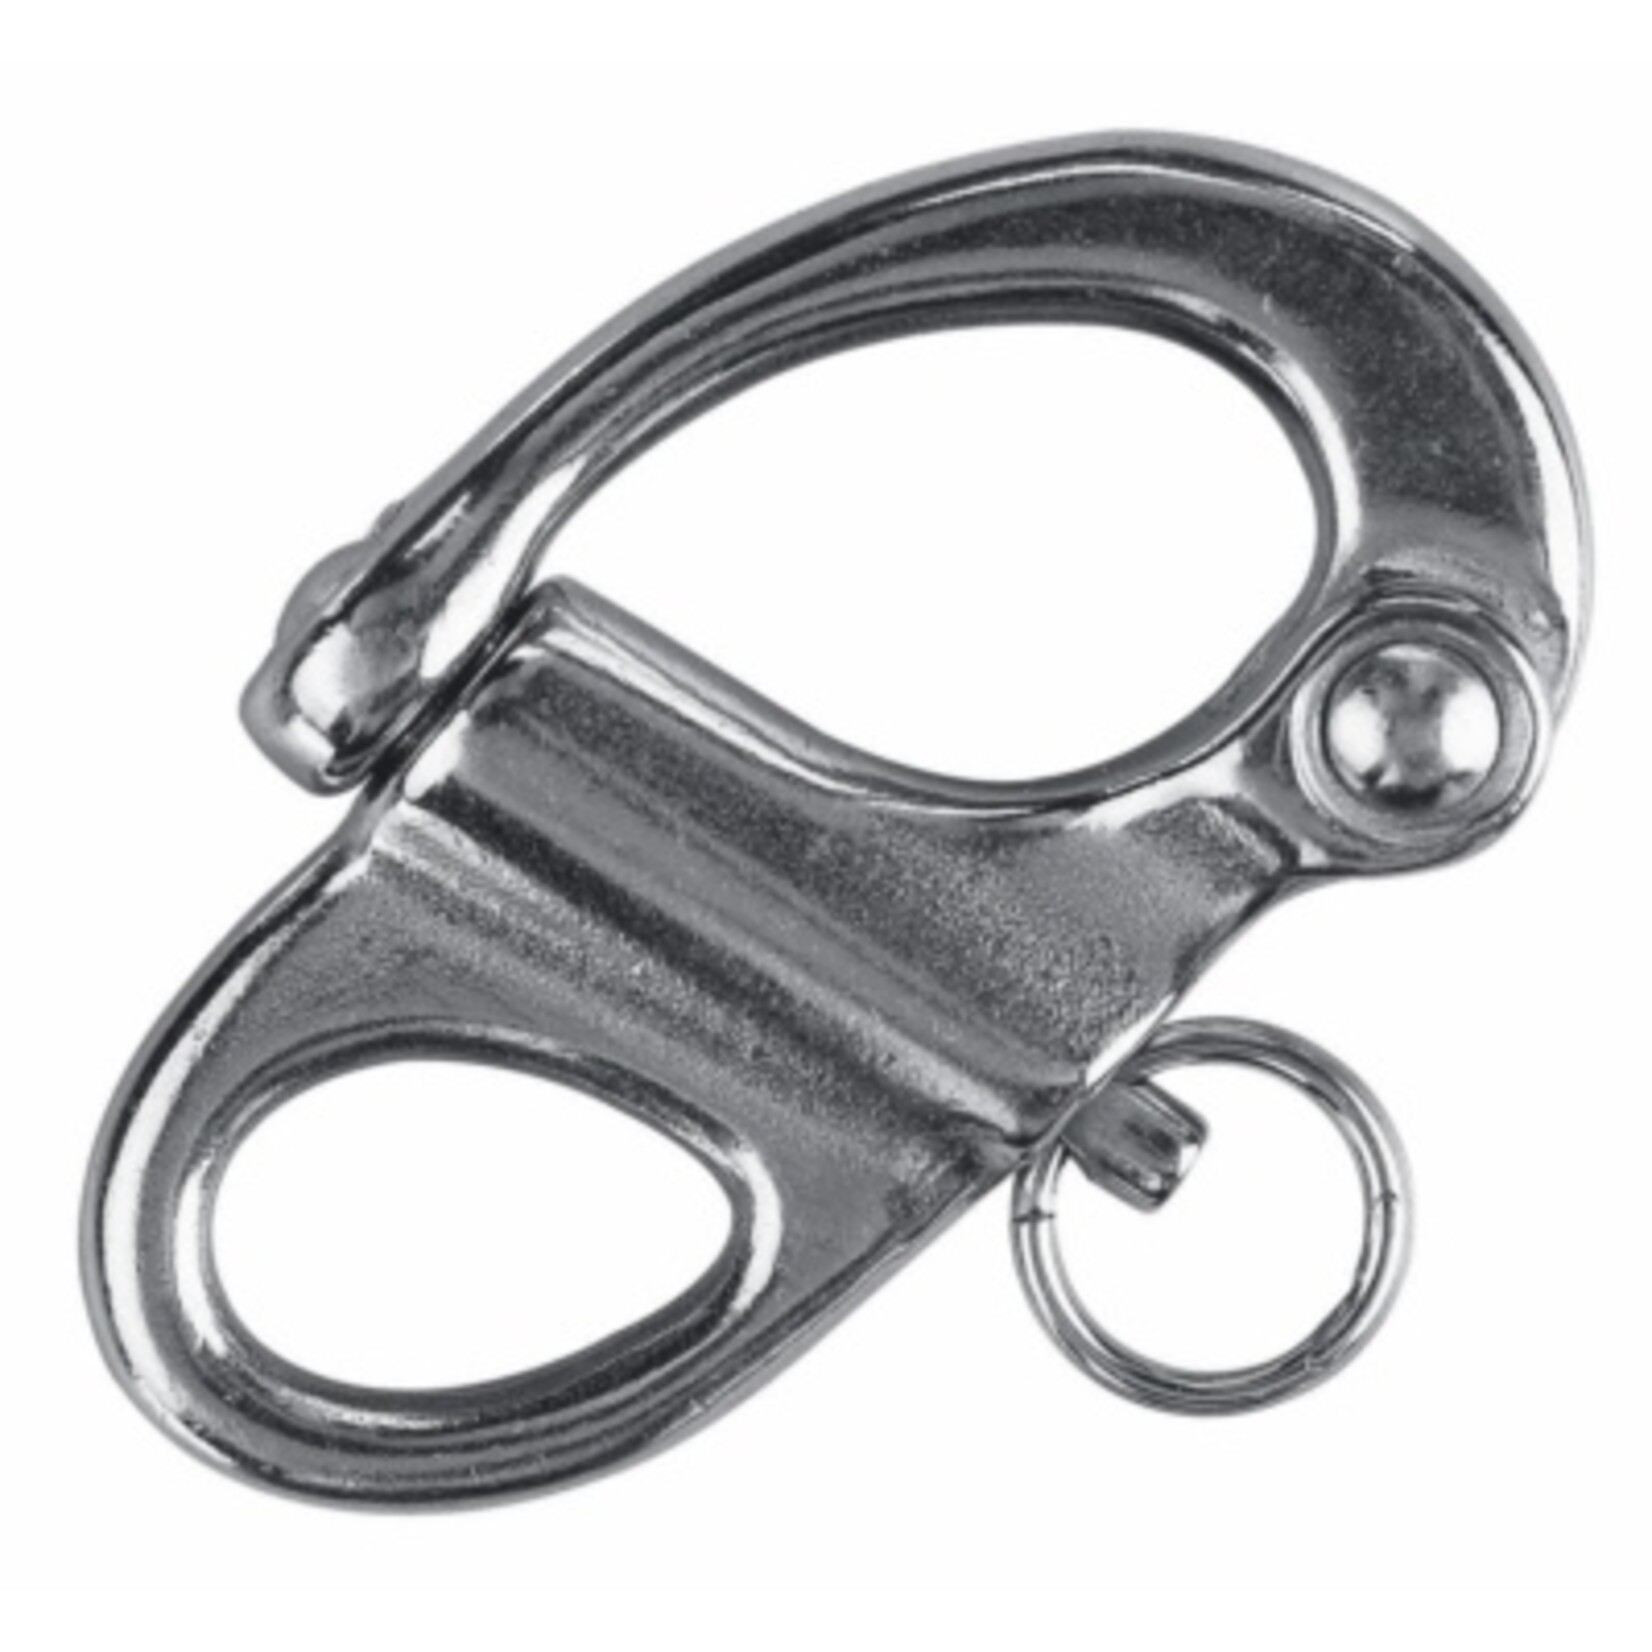 Plastimo Snap shackle s/s with fixed eye 70mm